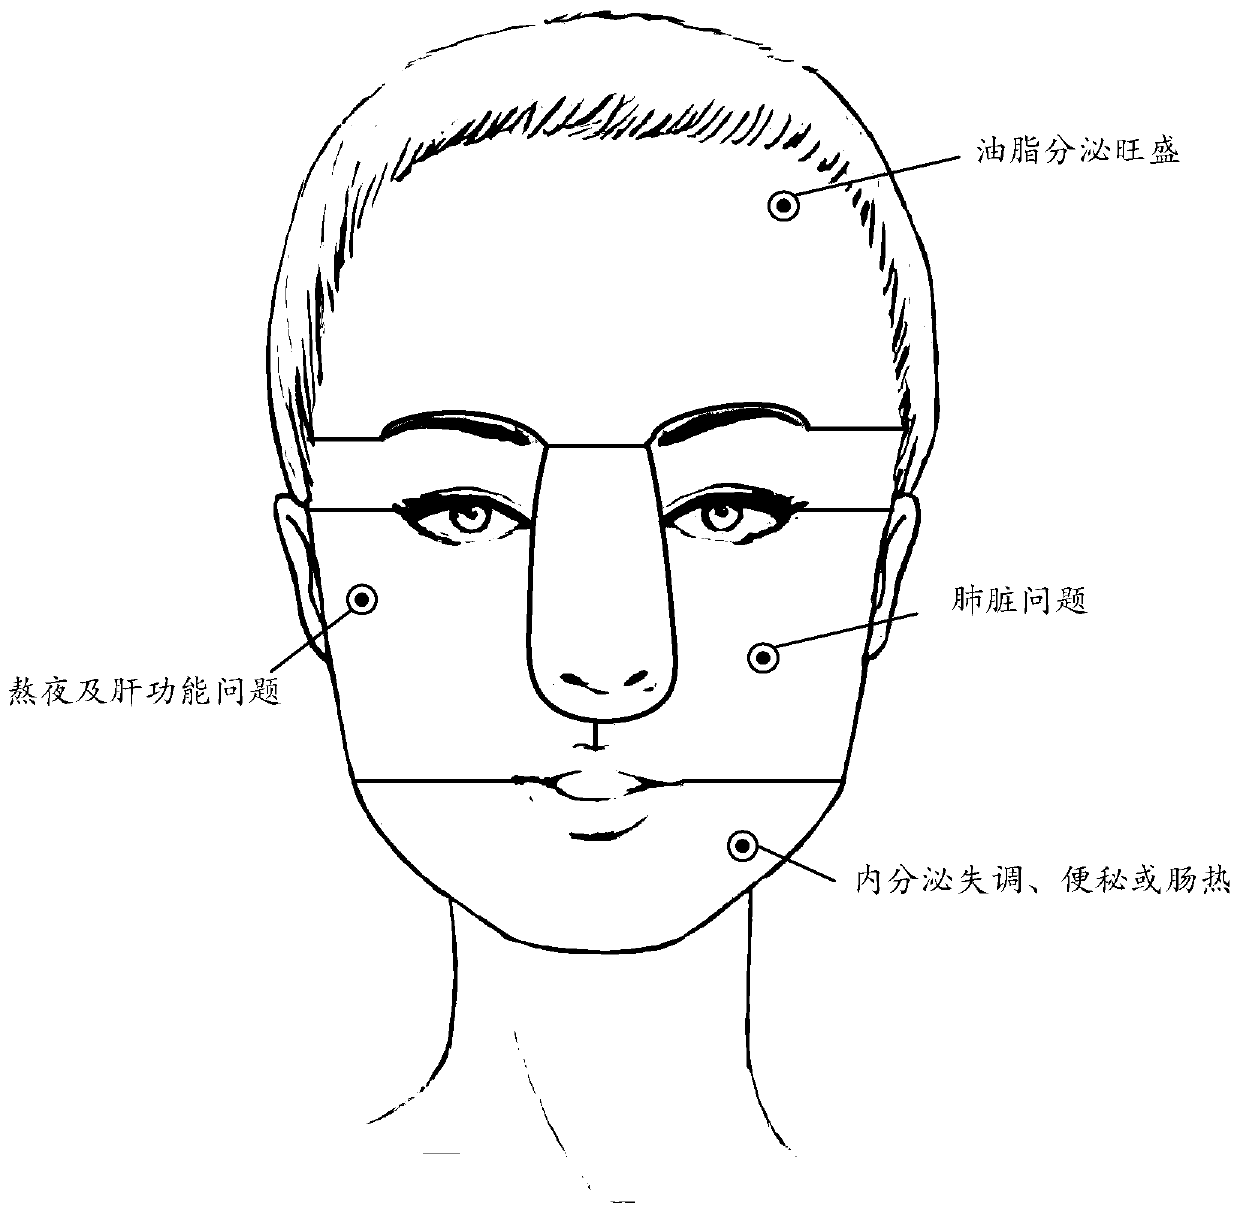 Skin problem diagnosis method based on deep learning face partitioning